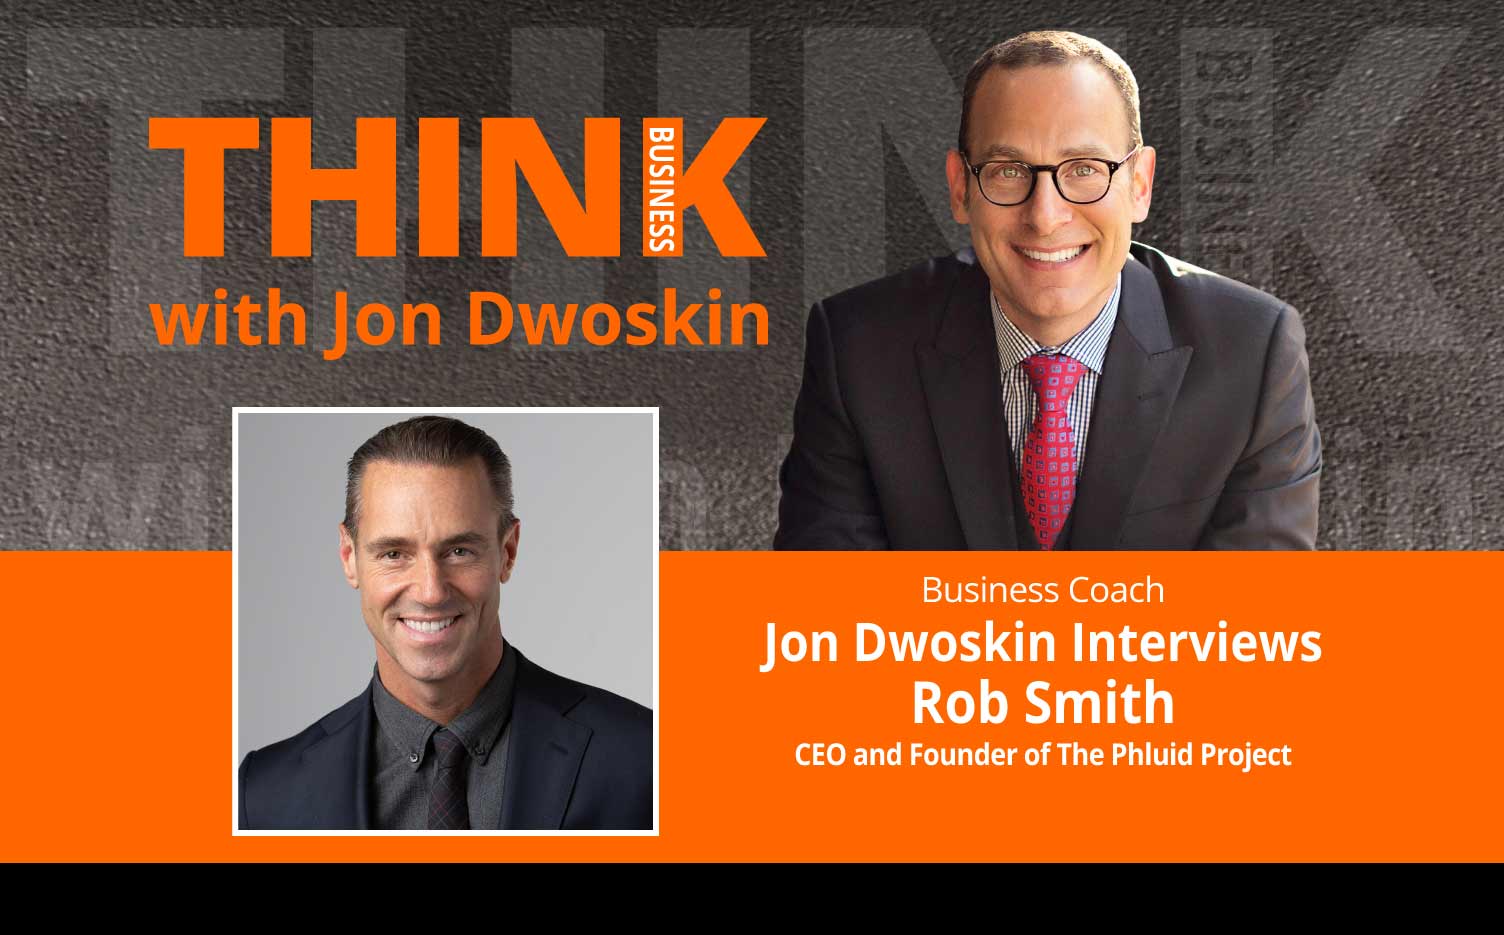 THINK Business Podcast: Jon Dwoskin Interviews Rob Smith, CEO and Founder of The Phluid Project